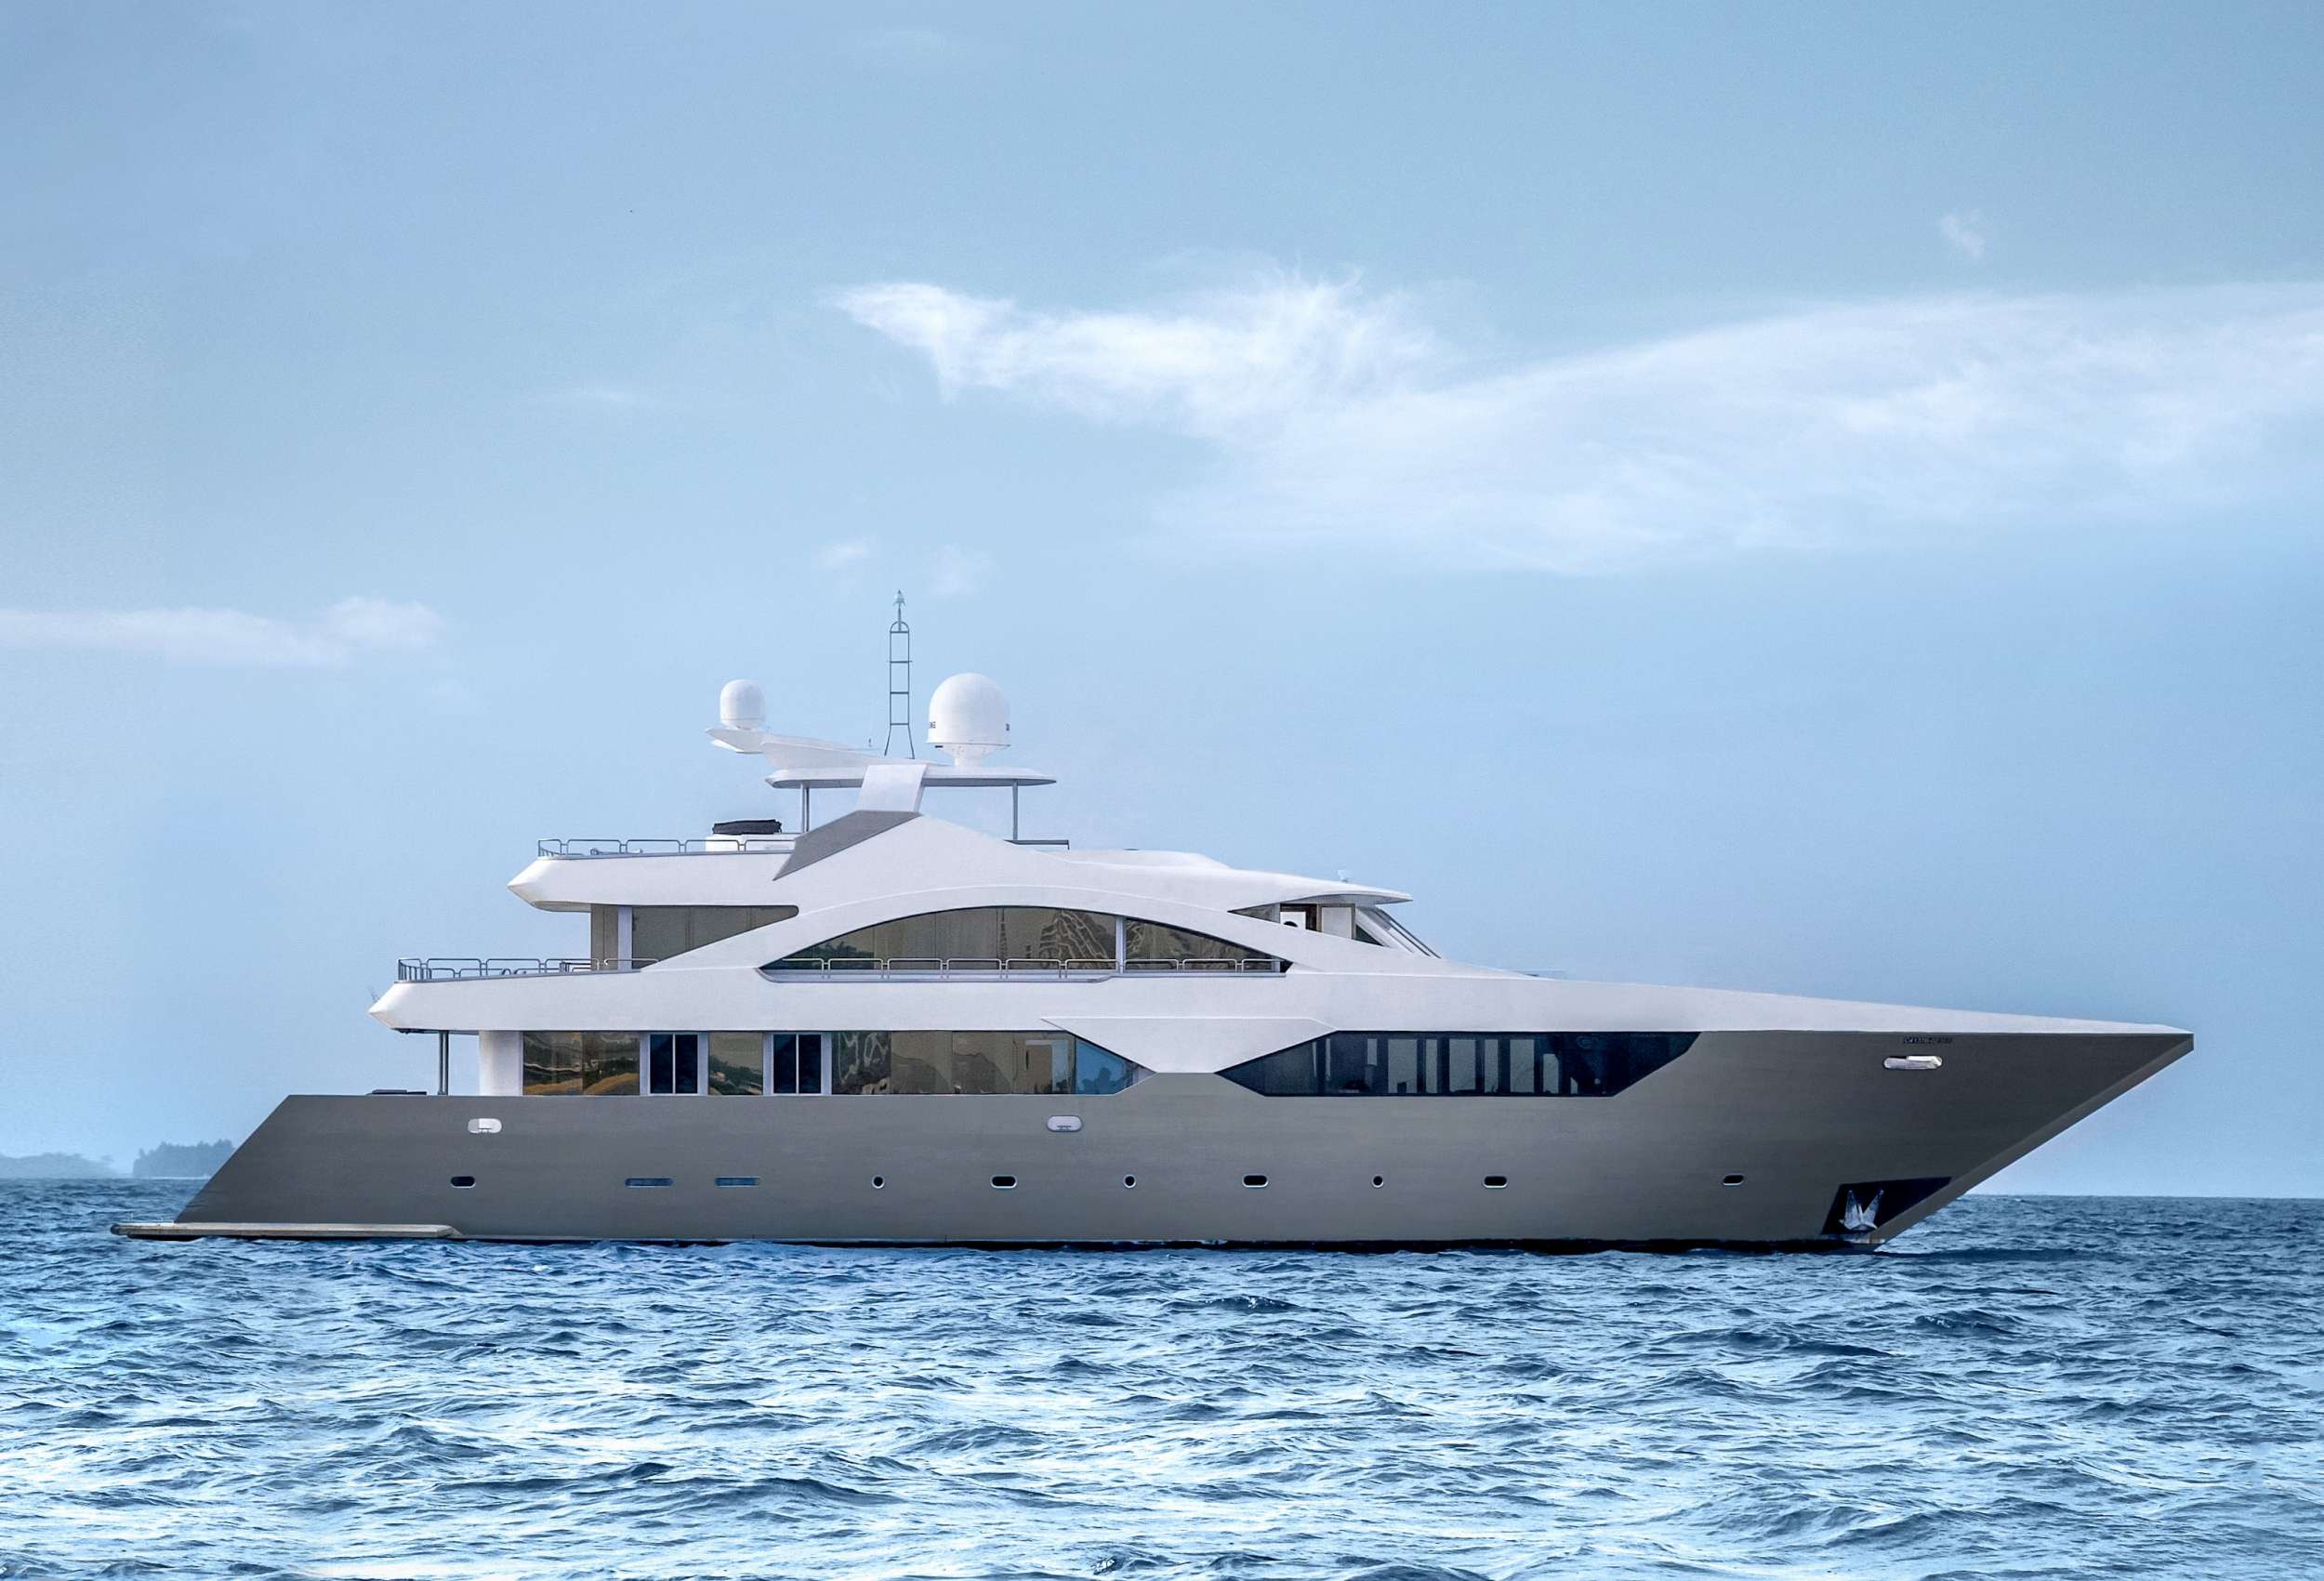 ARK NOBLE - Luxury yacht charter Maldives & Boat hire in Indian Ocean & SE Asia 1